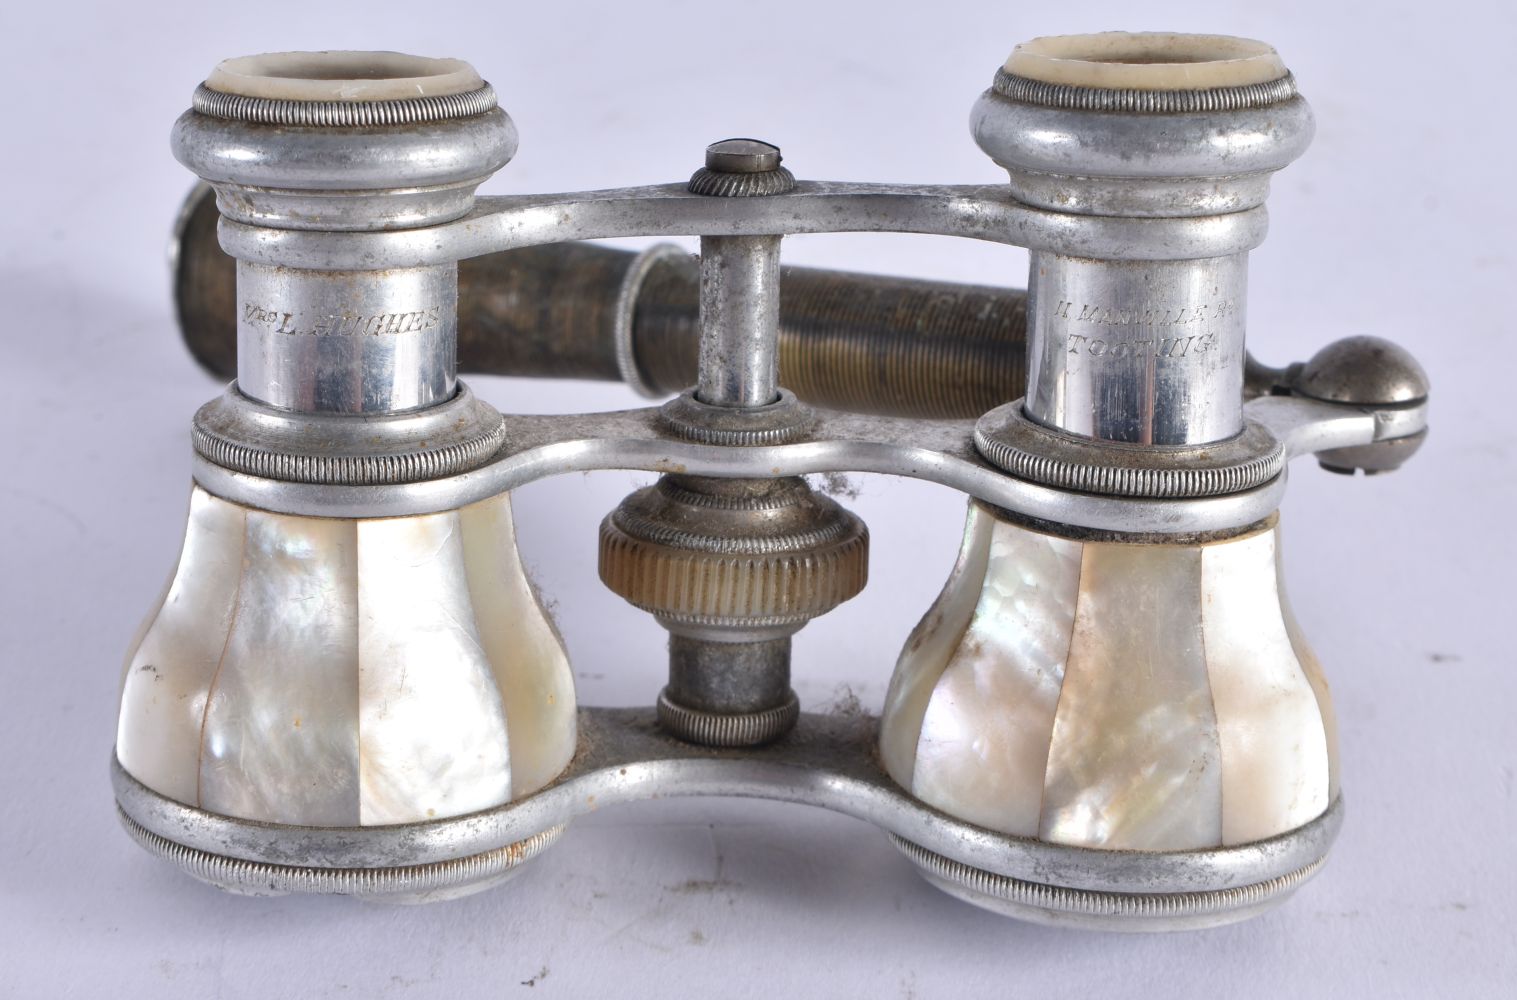 A PAIR OF MOTHER OF PEARL OPERA GLASSES. 21 cm x 8 cm. - Image 2 of 4